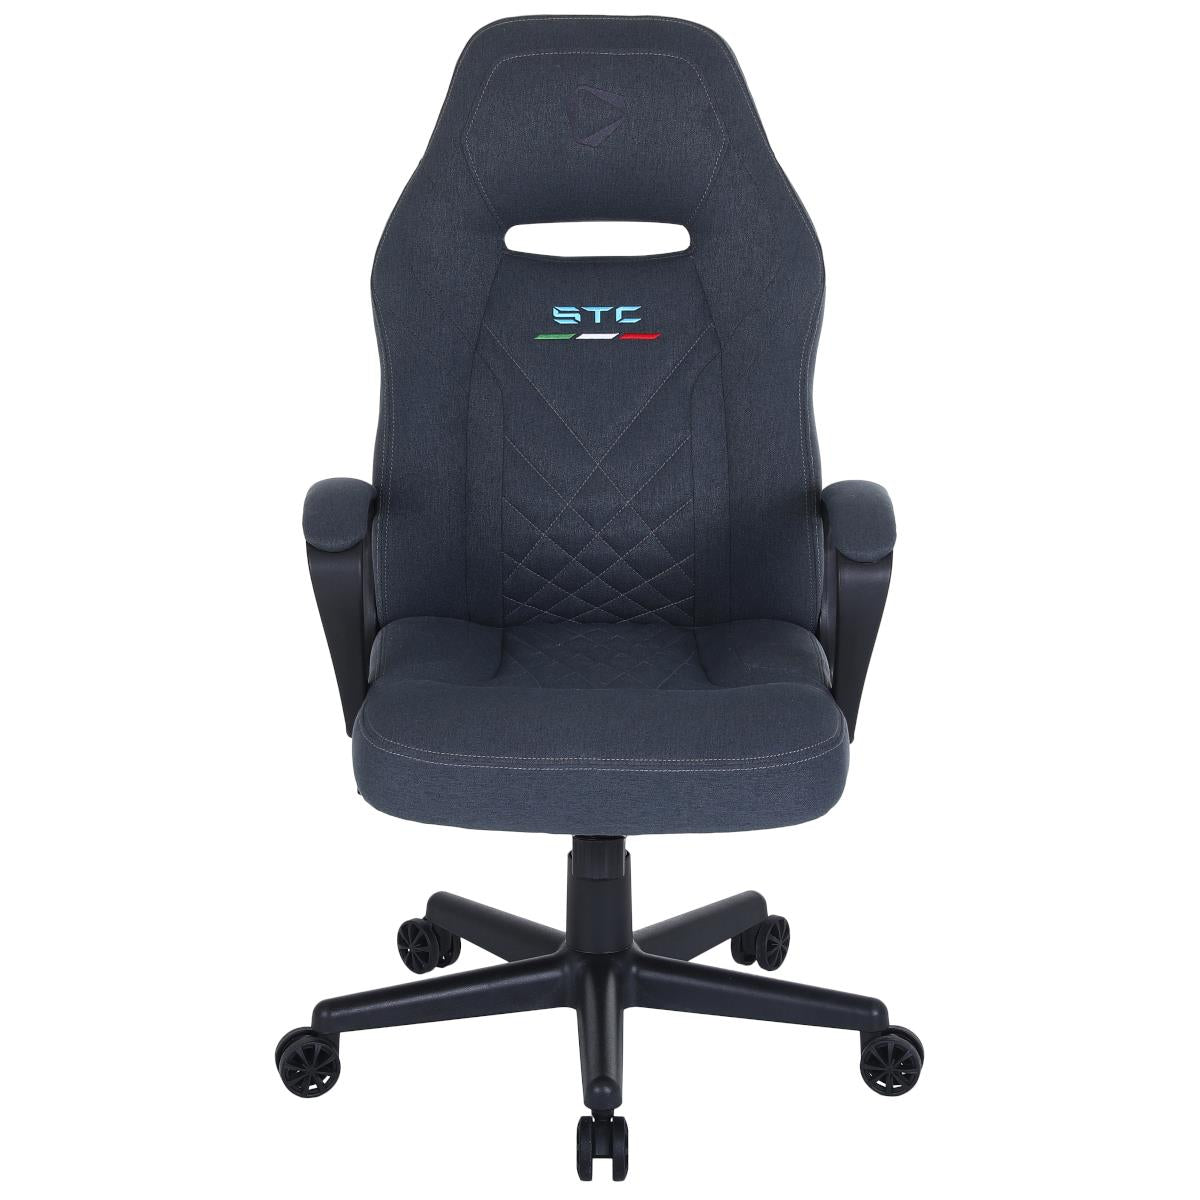 onex stc compact s series gaming/office chair (graphite) with short pile linen fabric